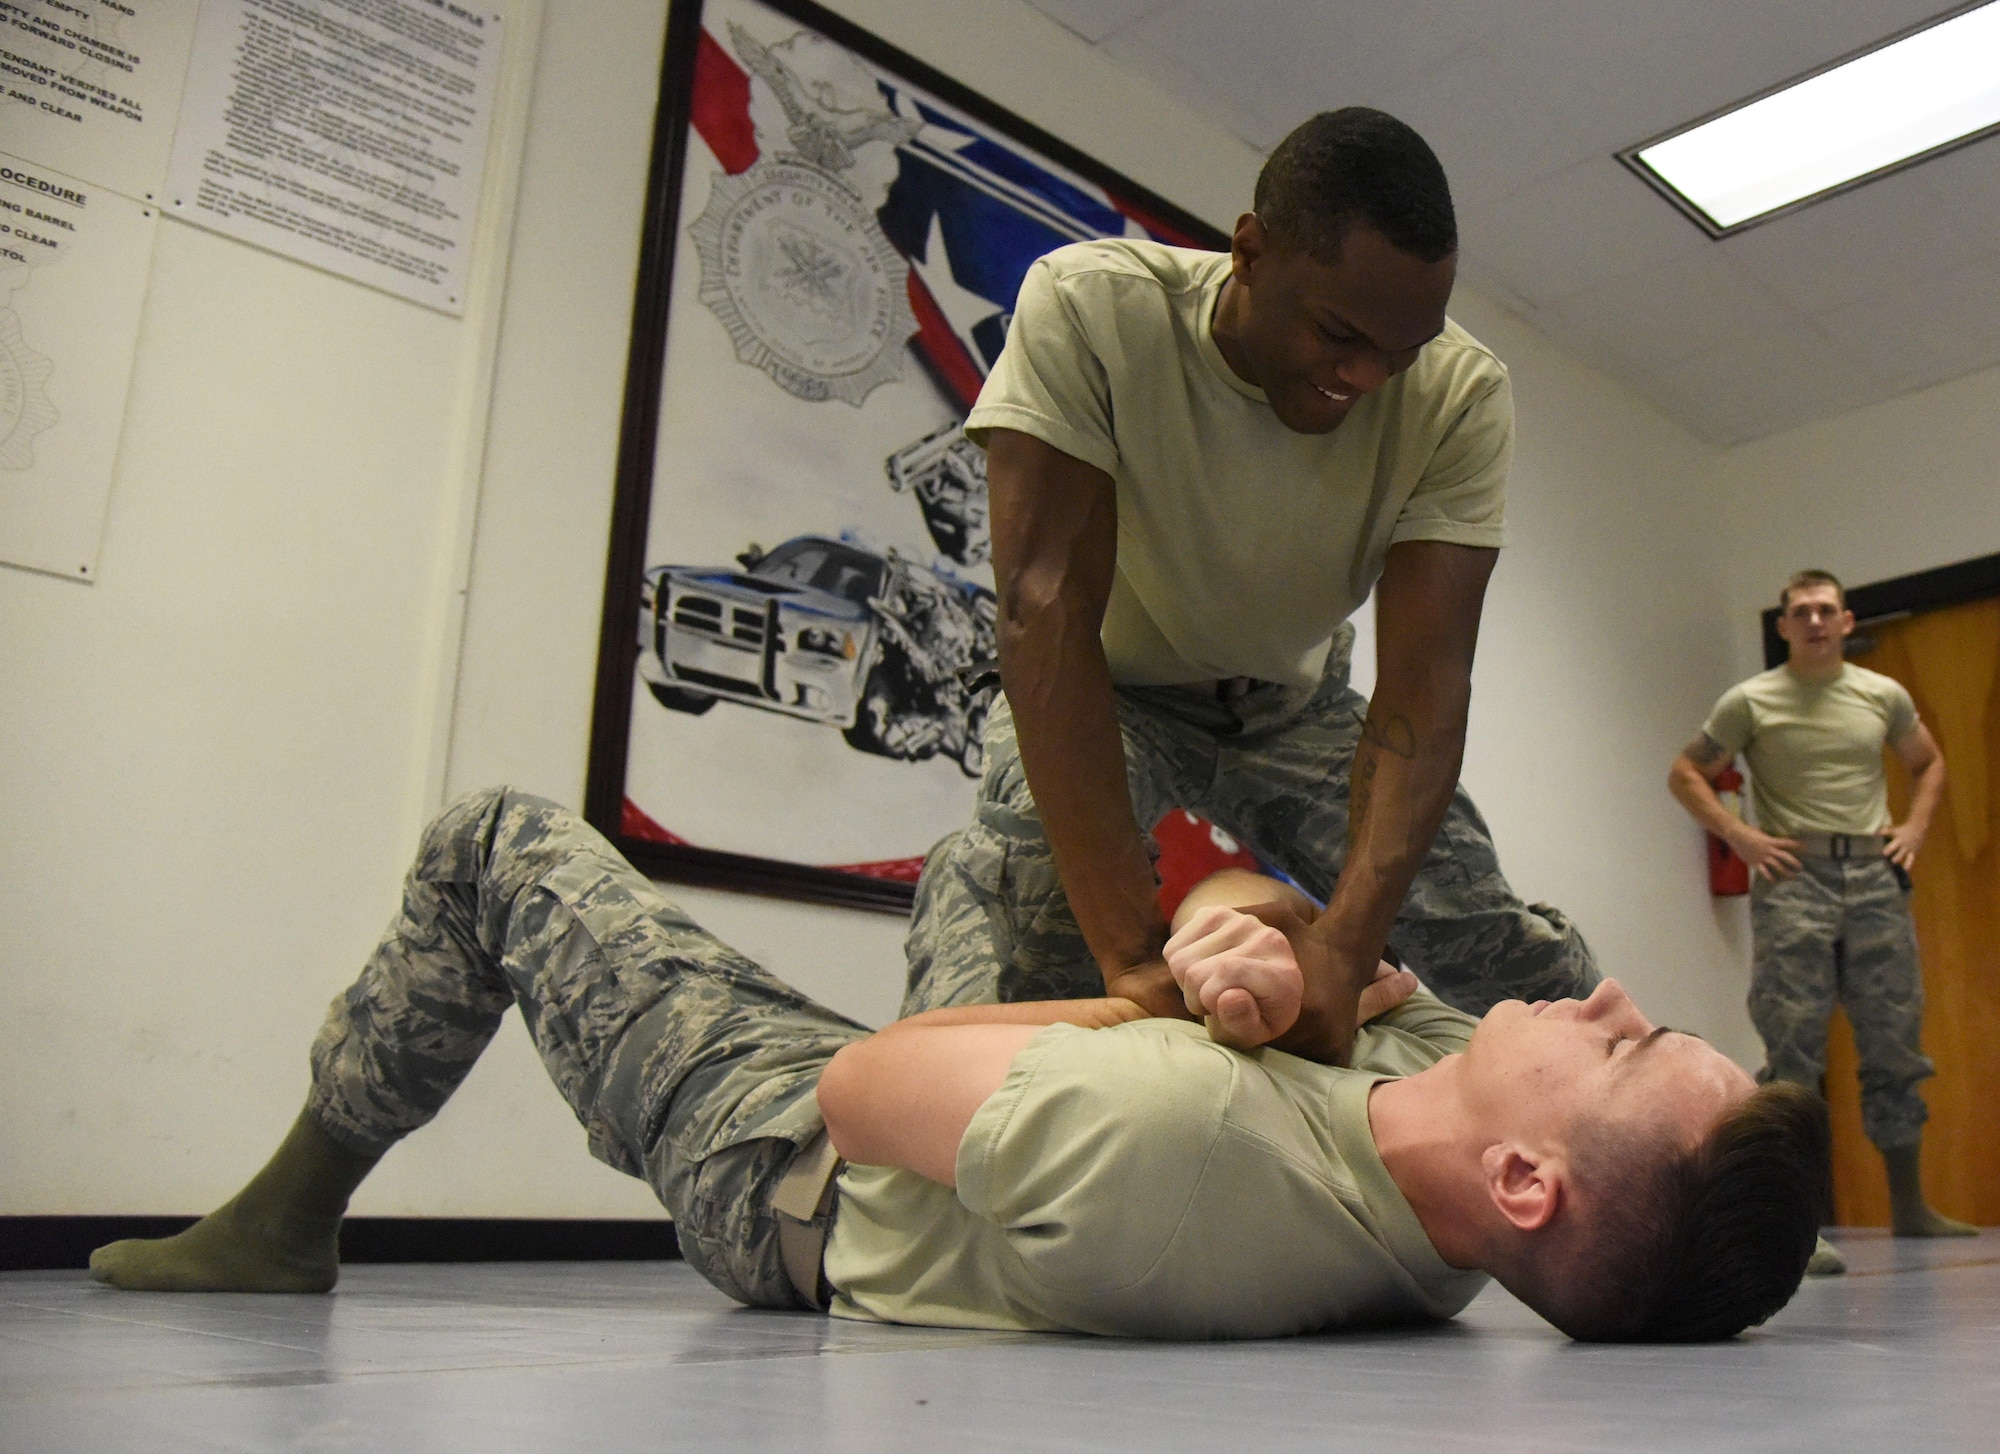 Senior Airman Curtis King II, 81st Security Forces Squadron entry controller, and Airman 1st Class Charles Wynne, 81st SFS entry controller, practice a combative technique during an 81st SFS combative training course at the SFS building Oct. 19, 2017, on Keesler Air Force Base, Mississippi. Approximately 15-20 defenders were taught skills vital to surviving a hand-to-hand ground fight using mixed martial arts and Jiu Jitsu techniques as another tool to survive a confrontational environment. (U.S. Air Force photo by Kemberly Groue)